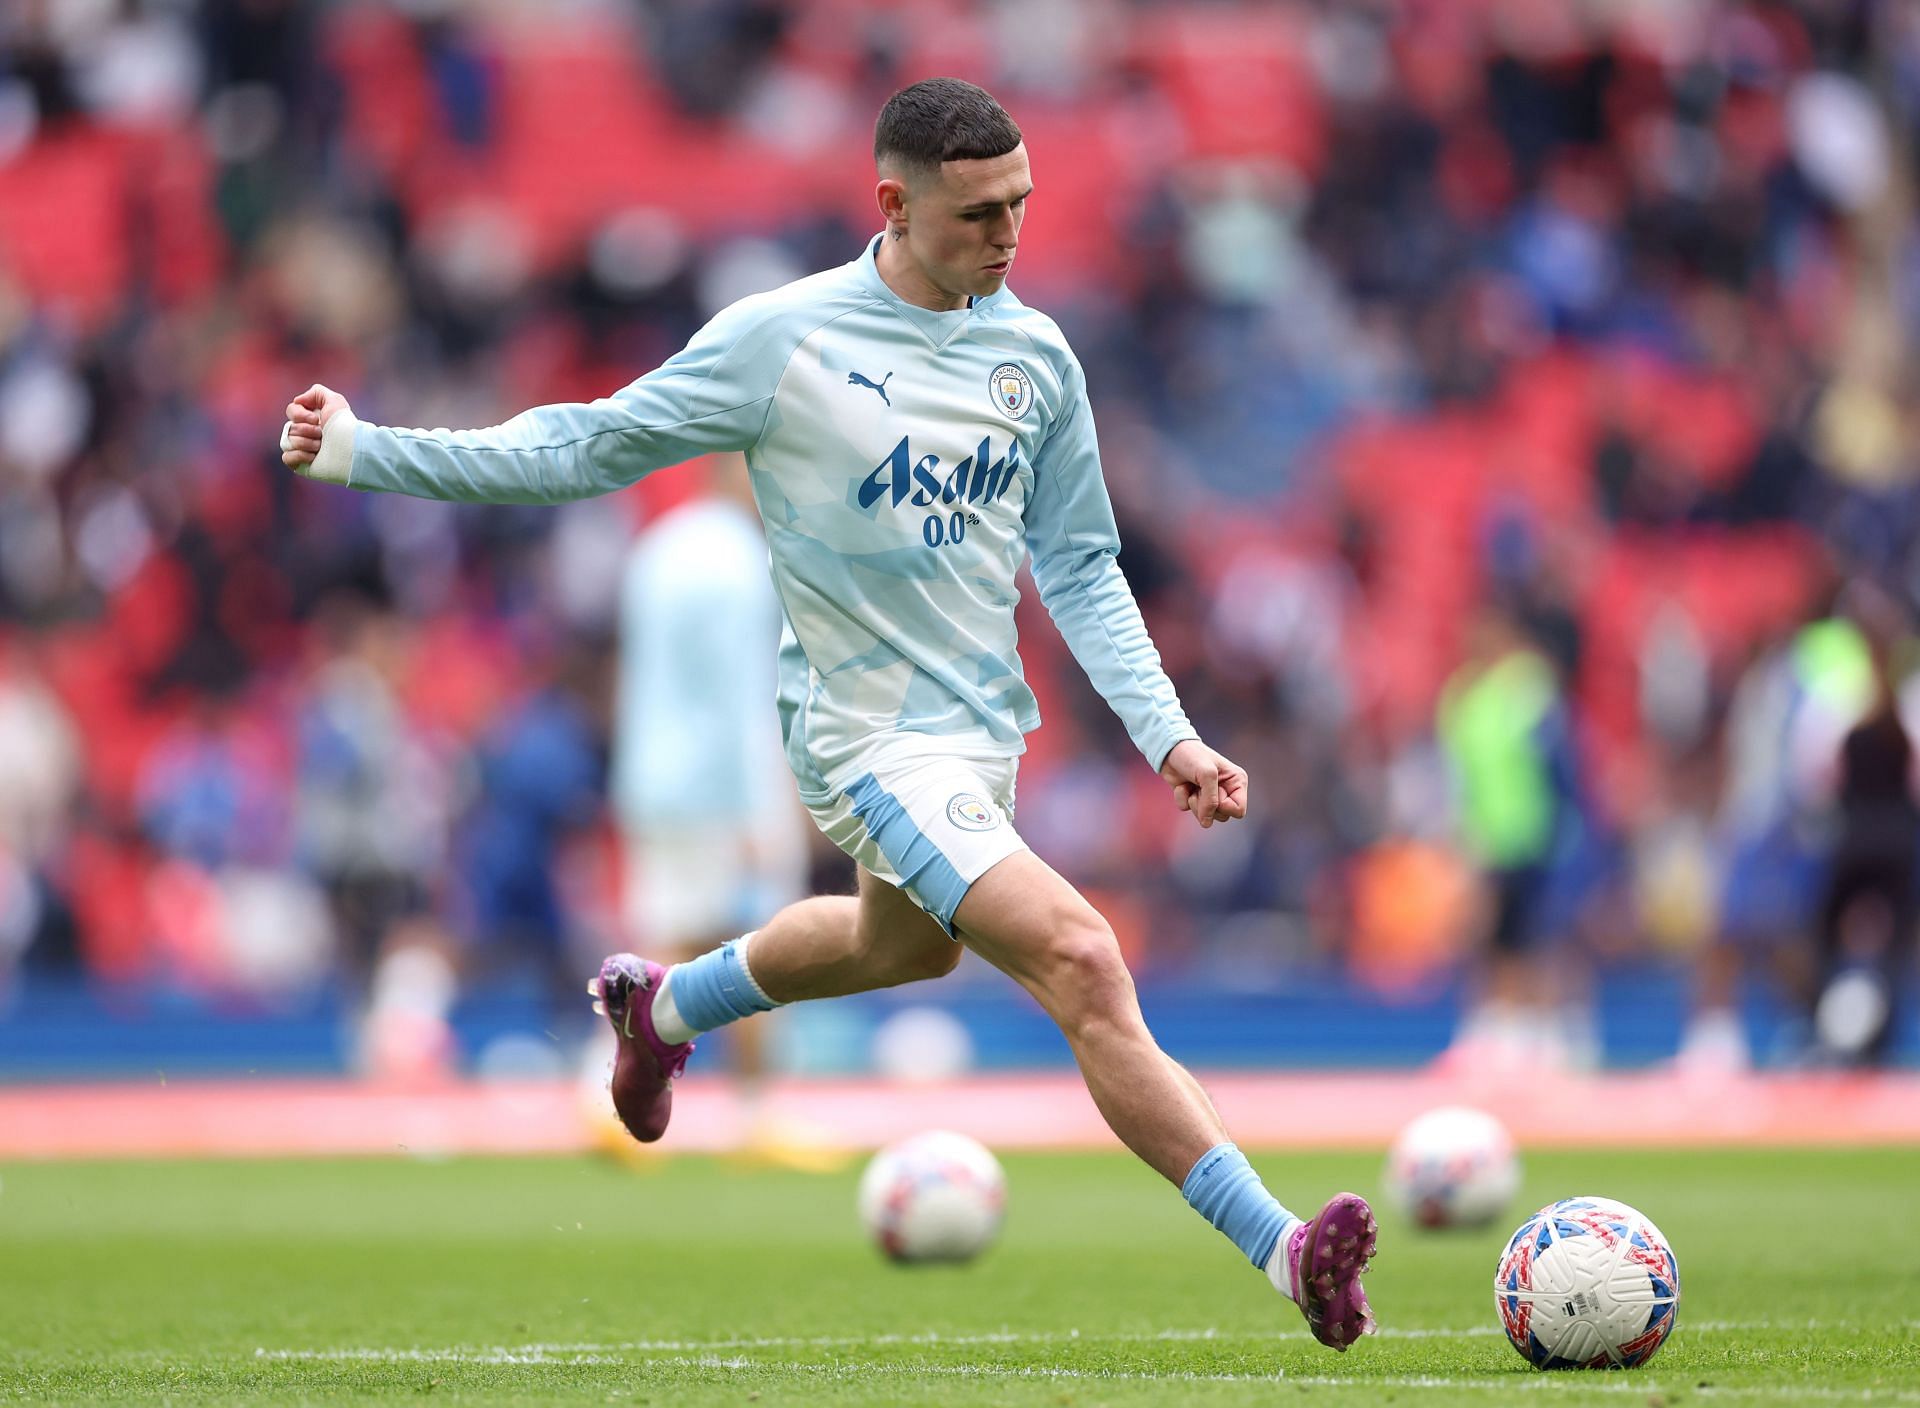 Manchester City forward Phil Foden